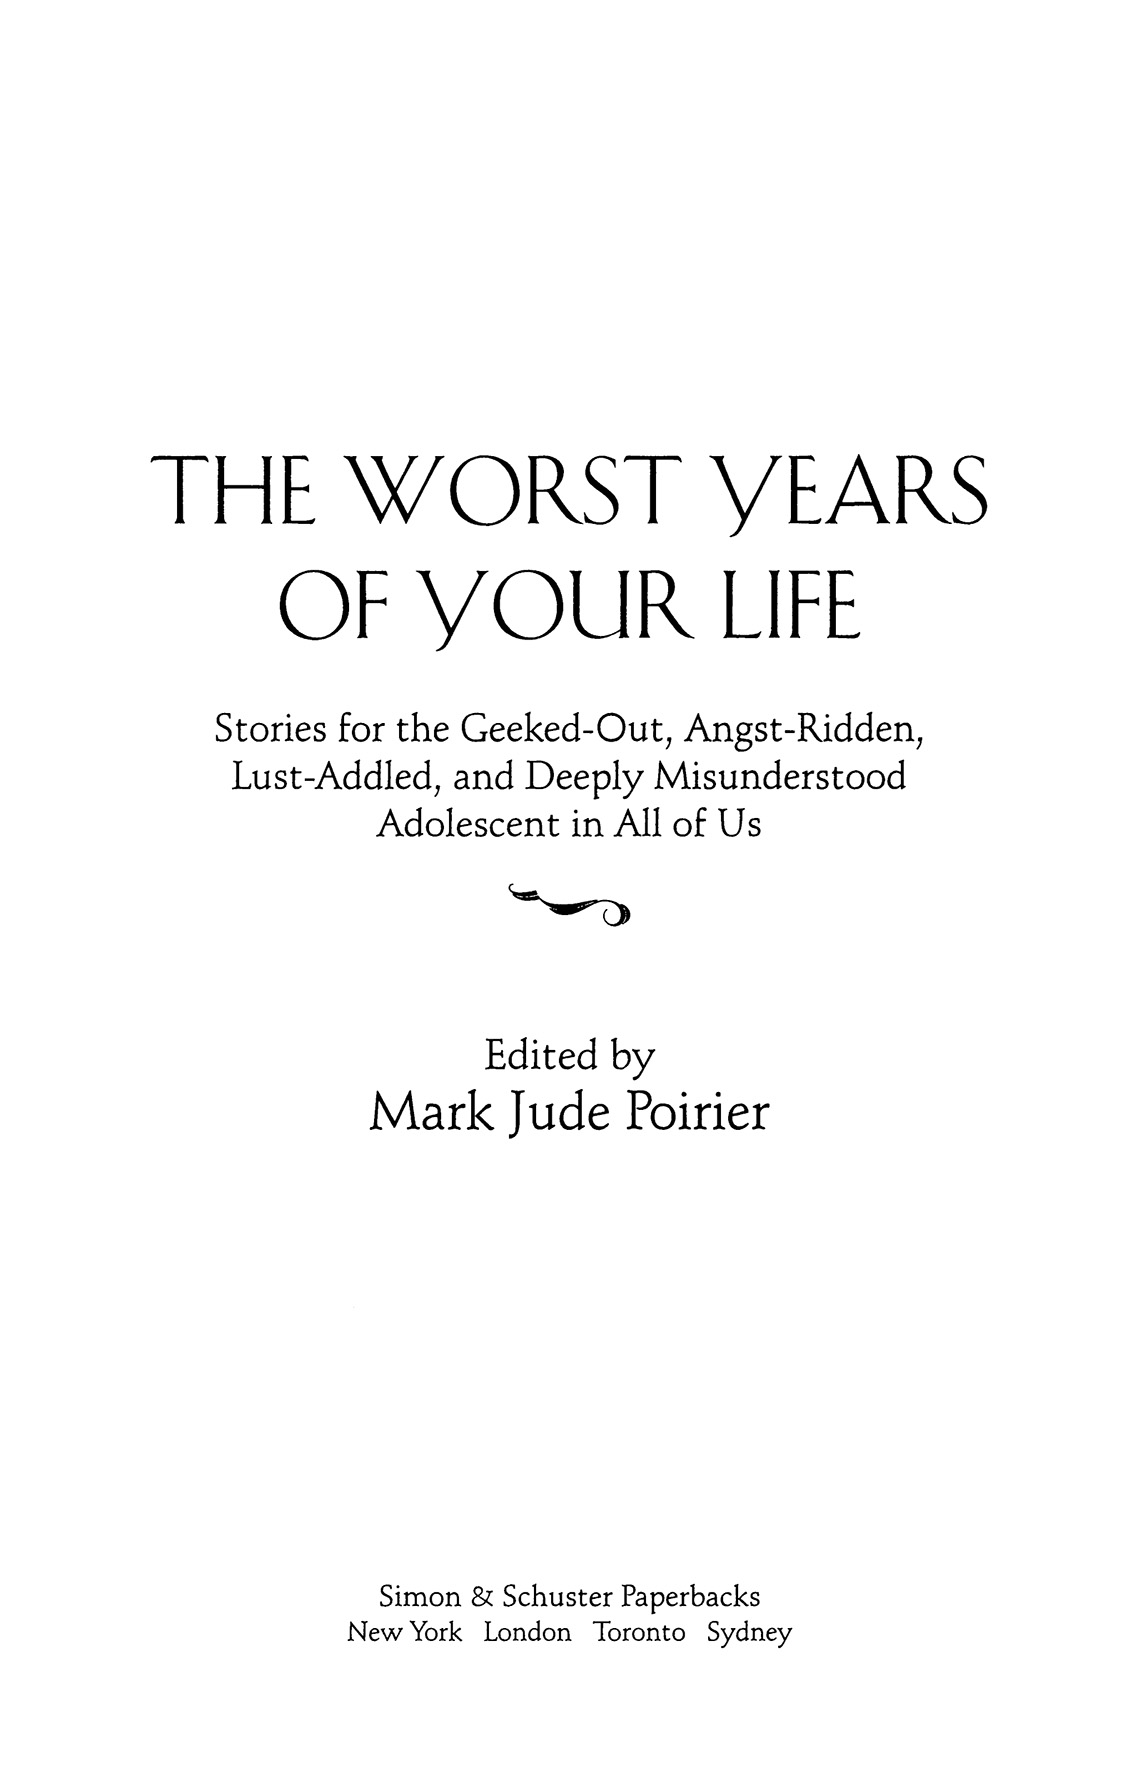 The Worst Years of Your Life by Mark Jude Poirier